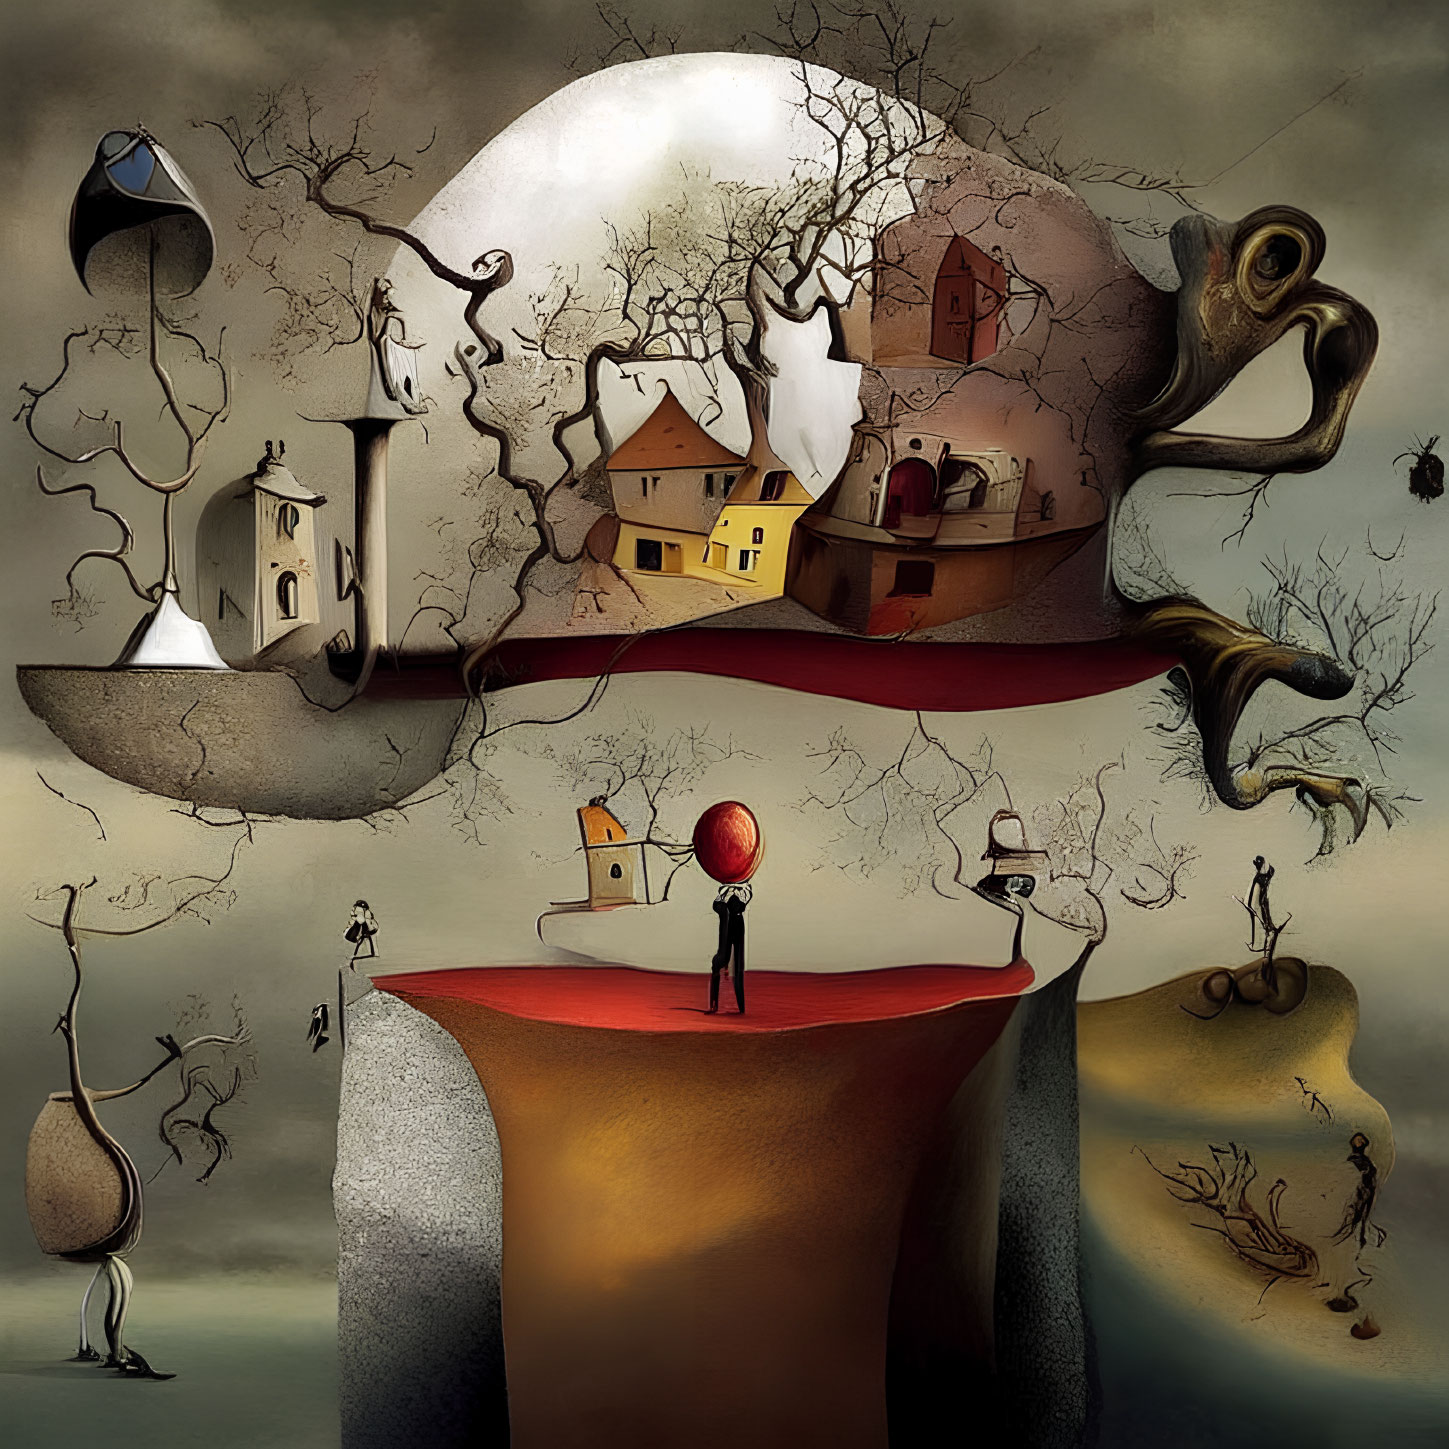 Surreal landscape featuring central figure with red balloon among dreamlike elements